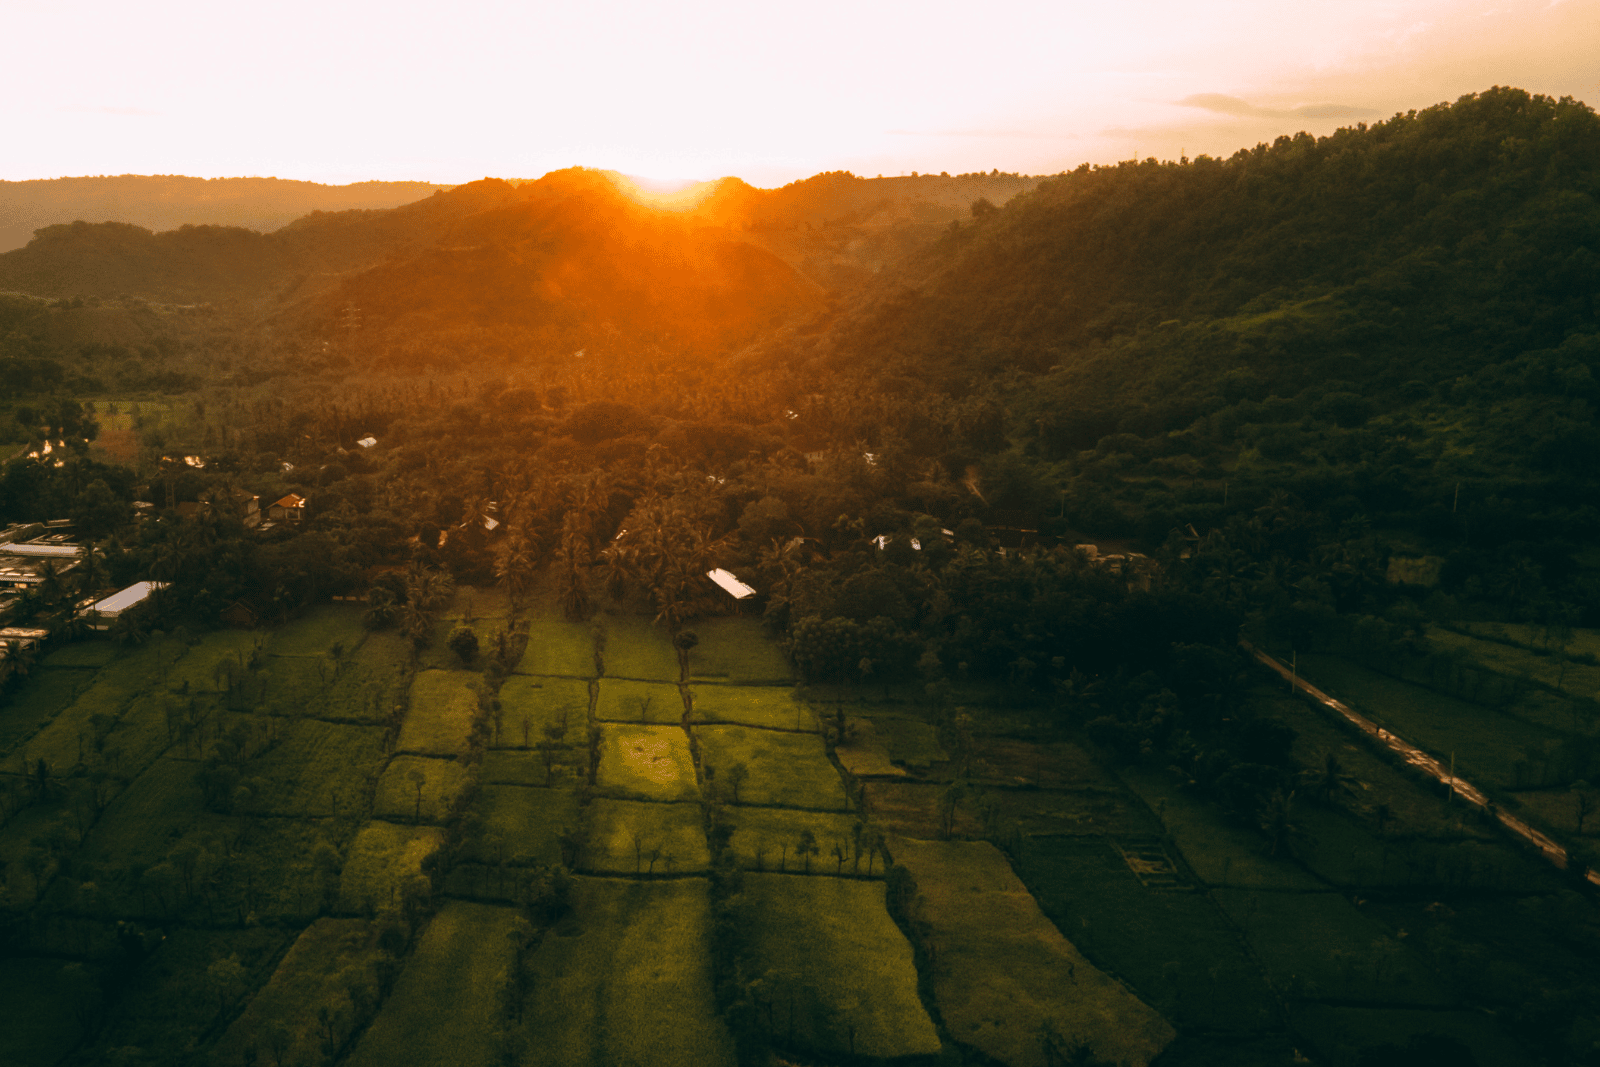 A sunset covers the green hills of Bali in a golden glow. From the arial view, we see Hotel Komune below, where Upstate Studios is hosting a stunning retreat.